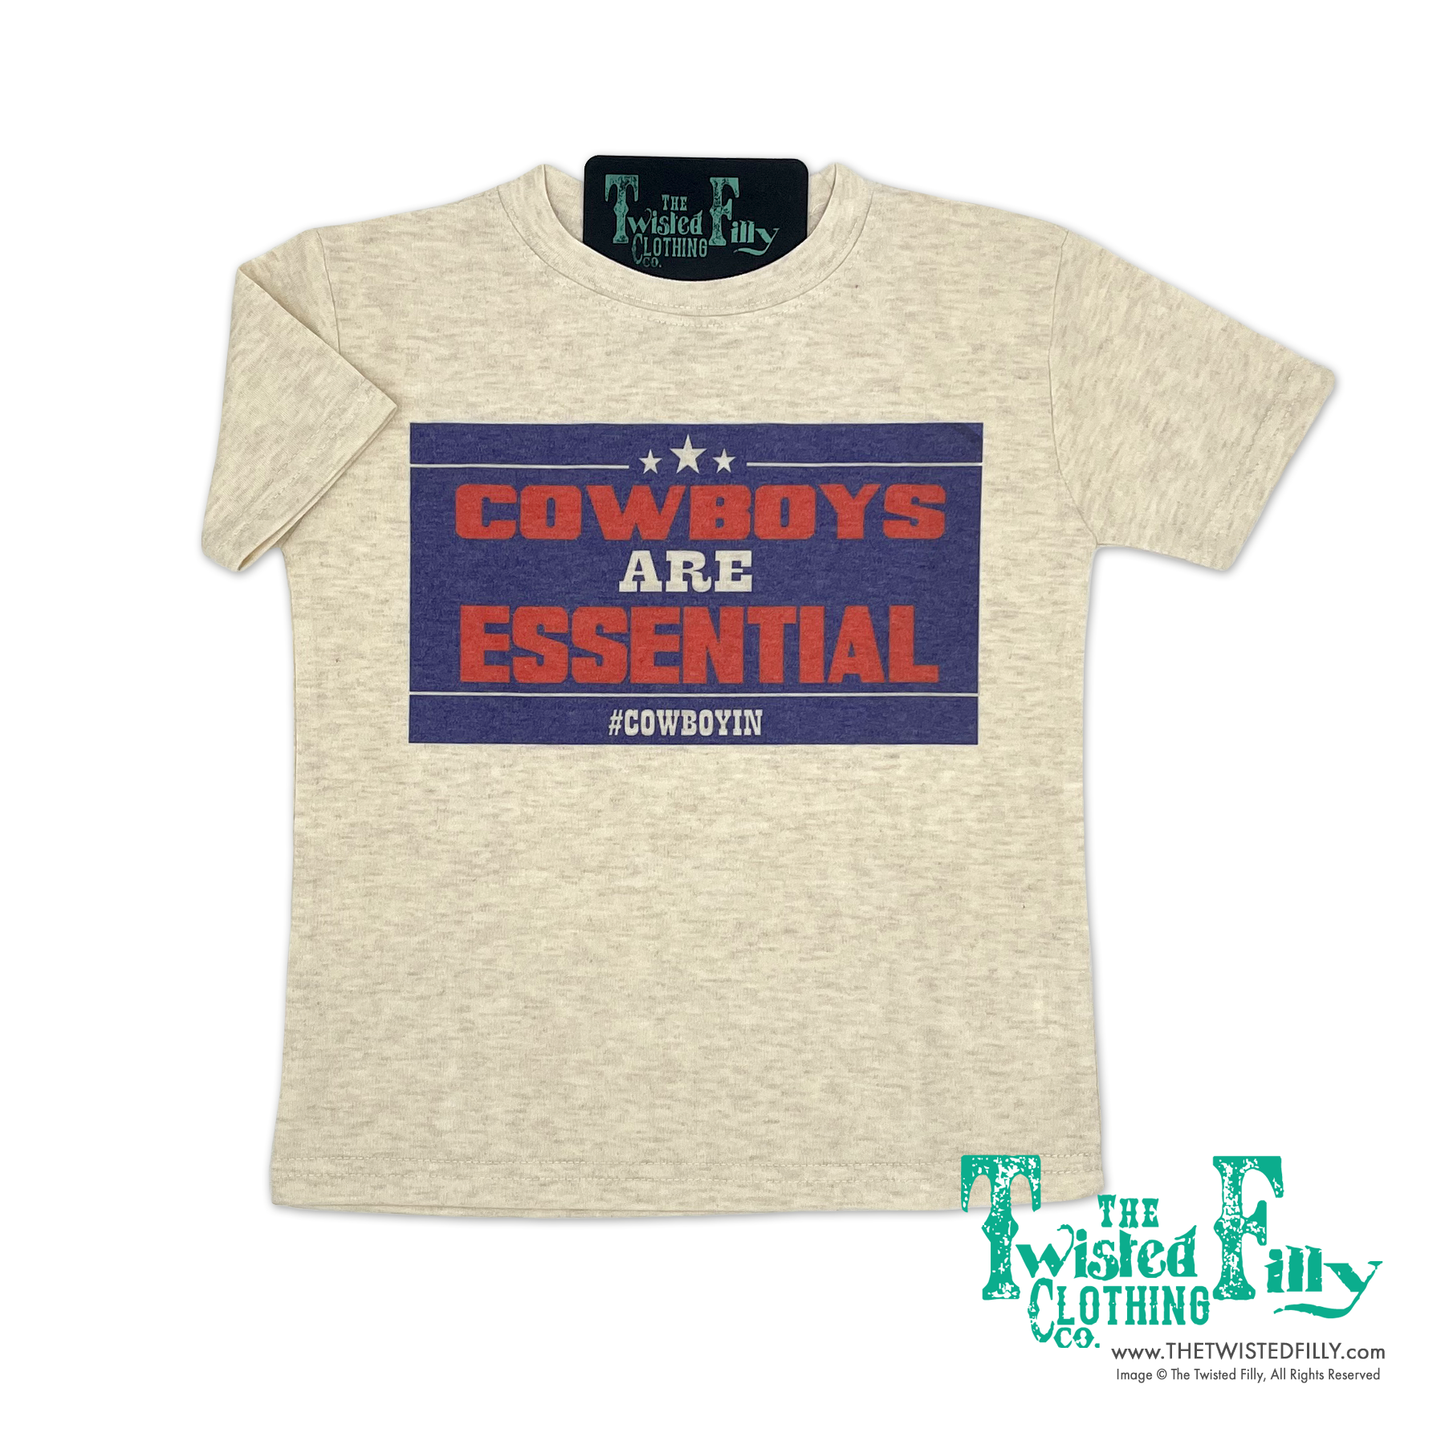 Cowboys Are Essential - S/S Adult Unisex Crew Neck Tee - Oatmeal